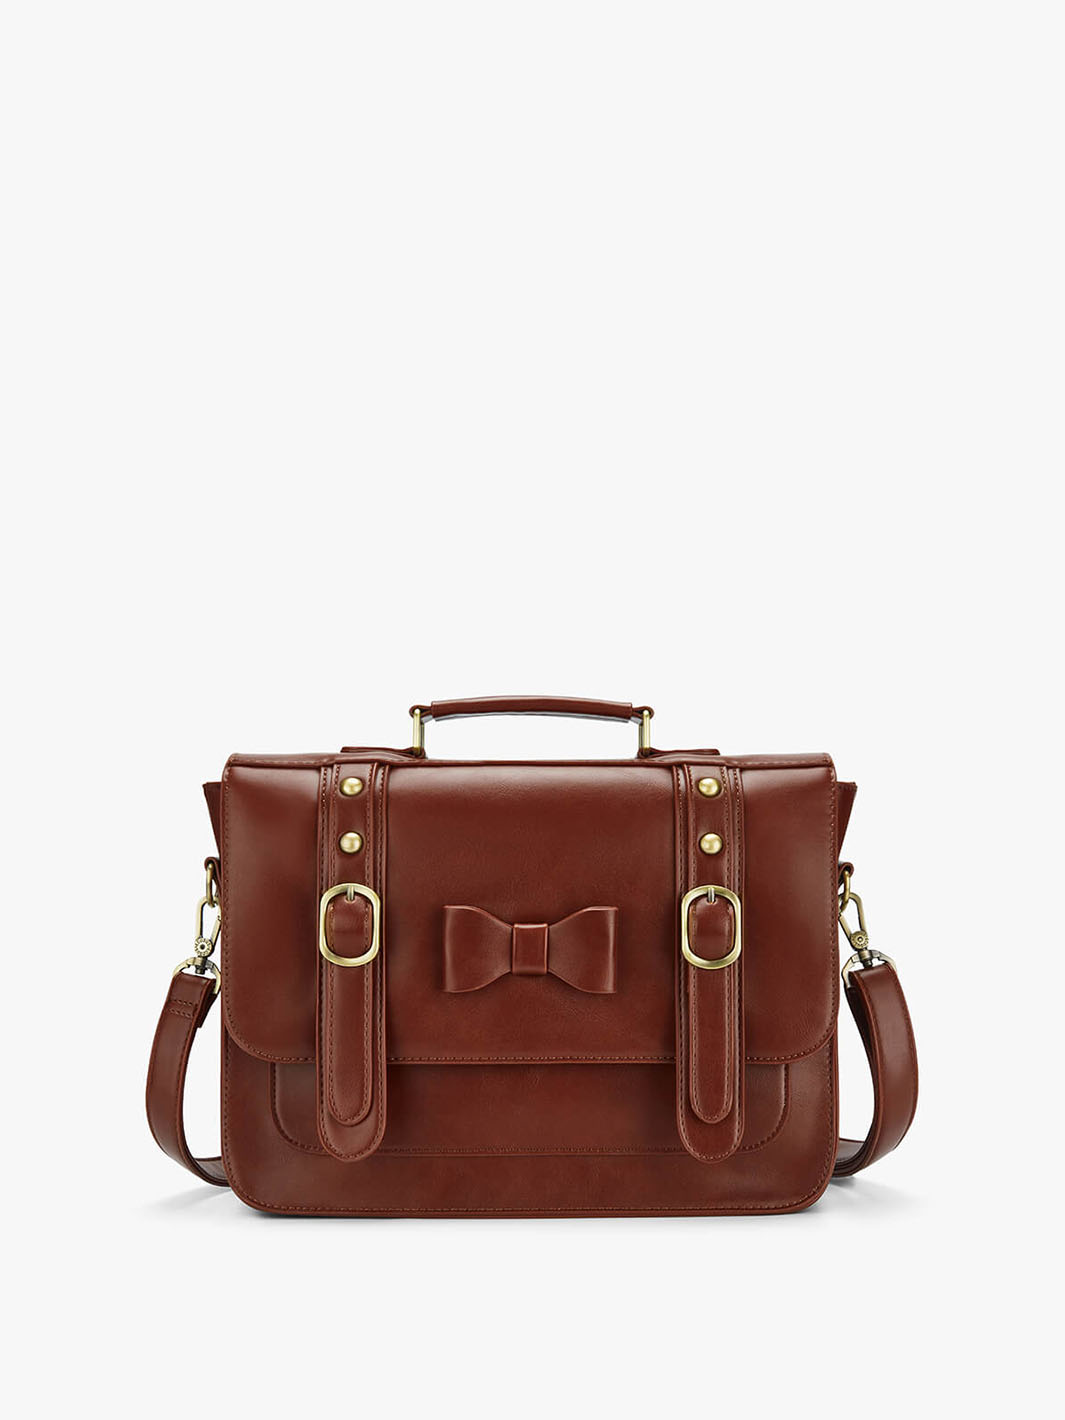 The allure of non-leather bags